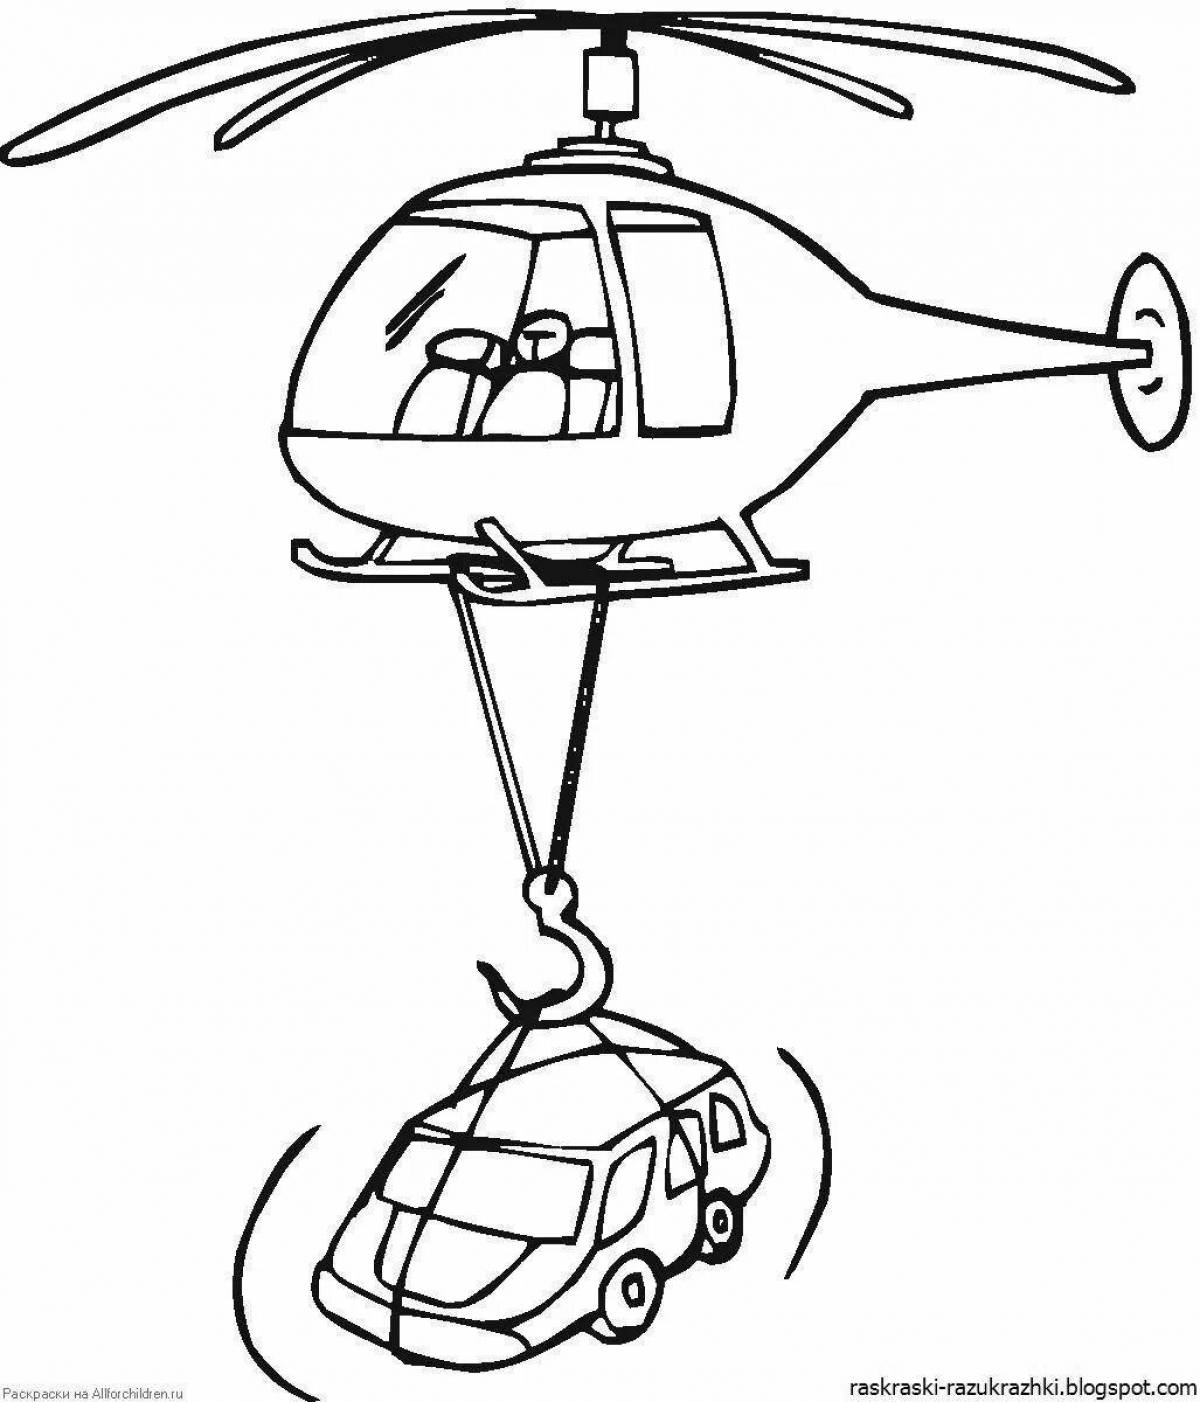 Cute helicopter coloring book for kids